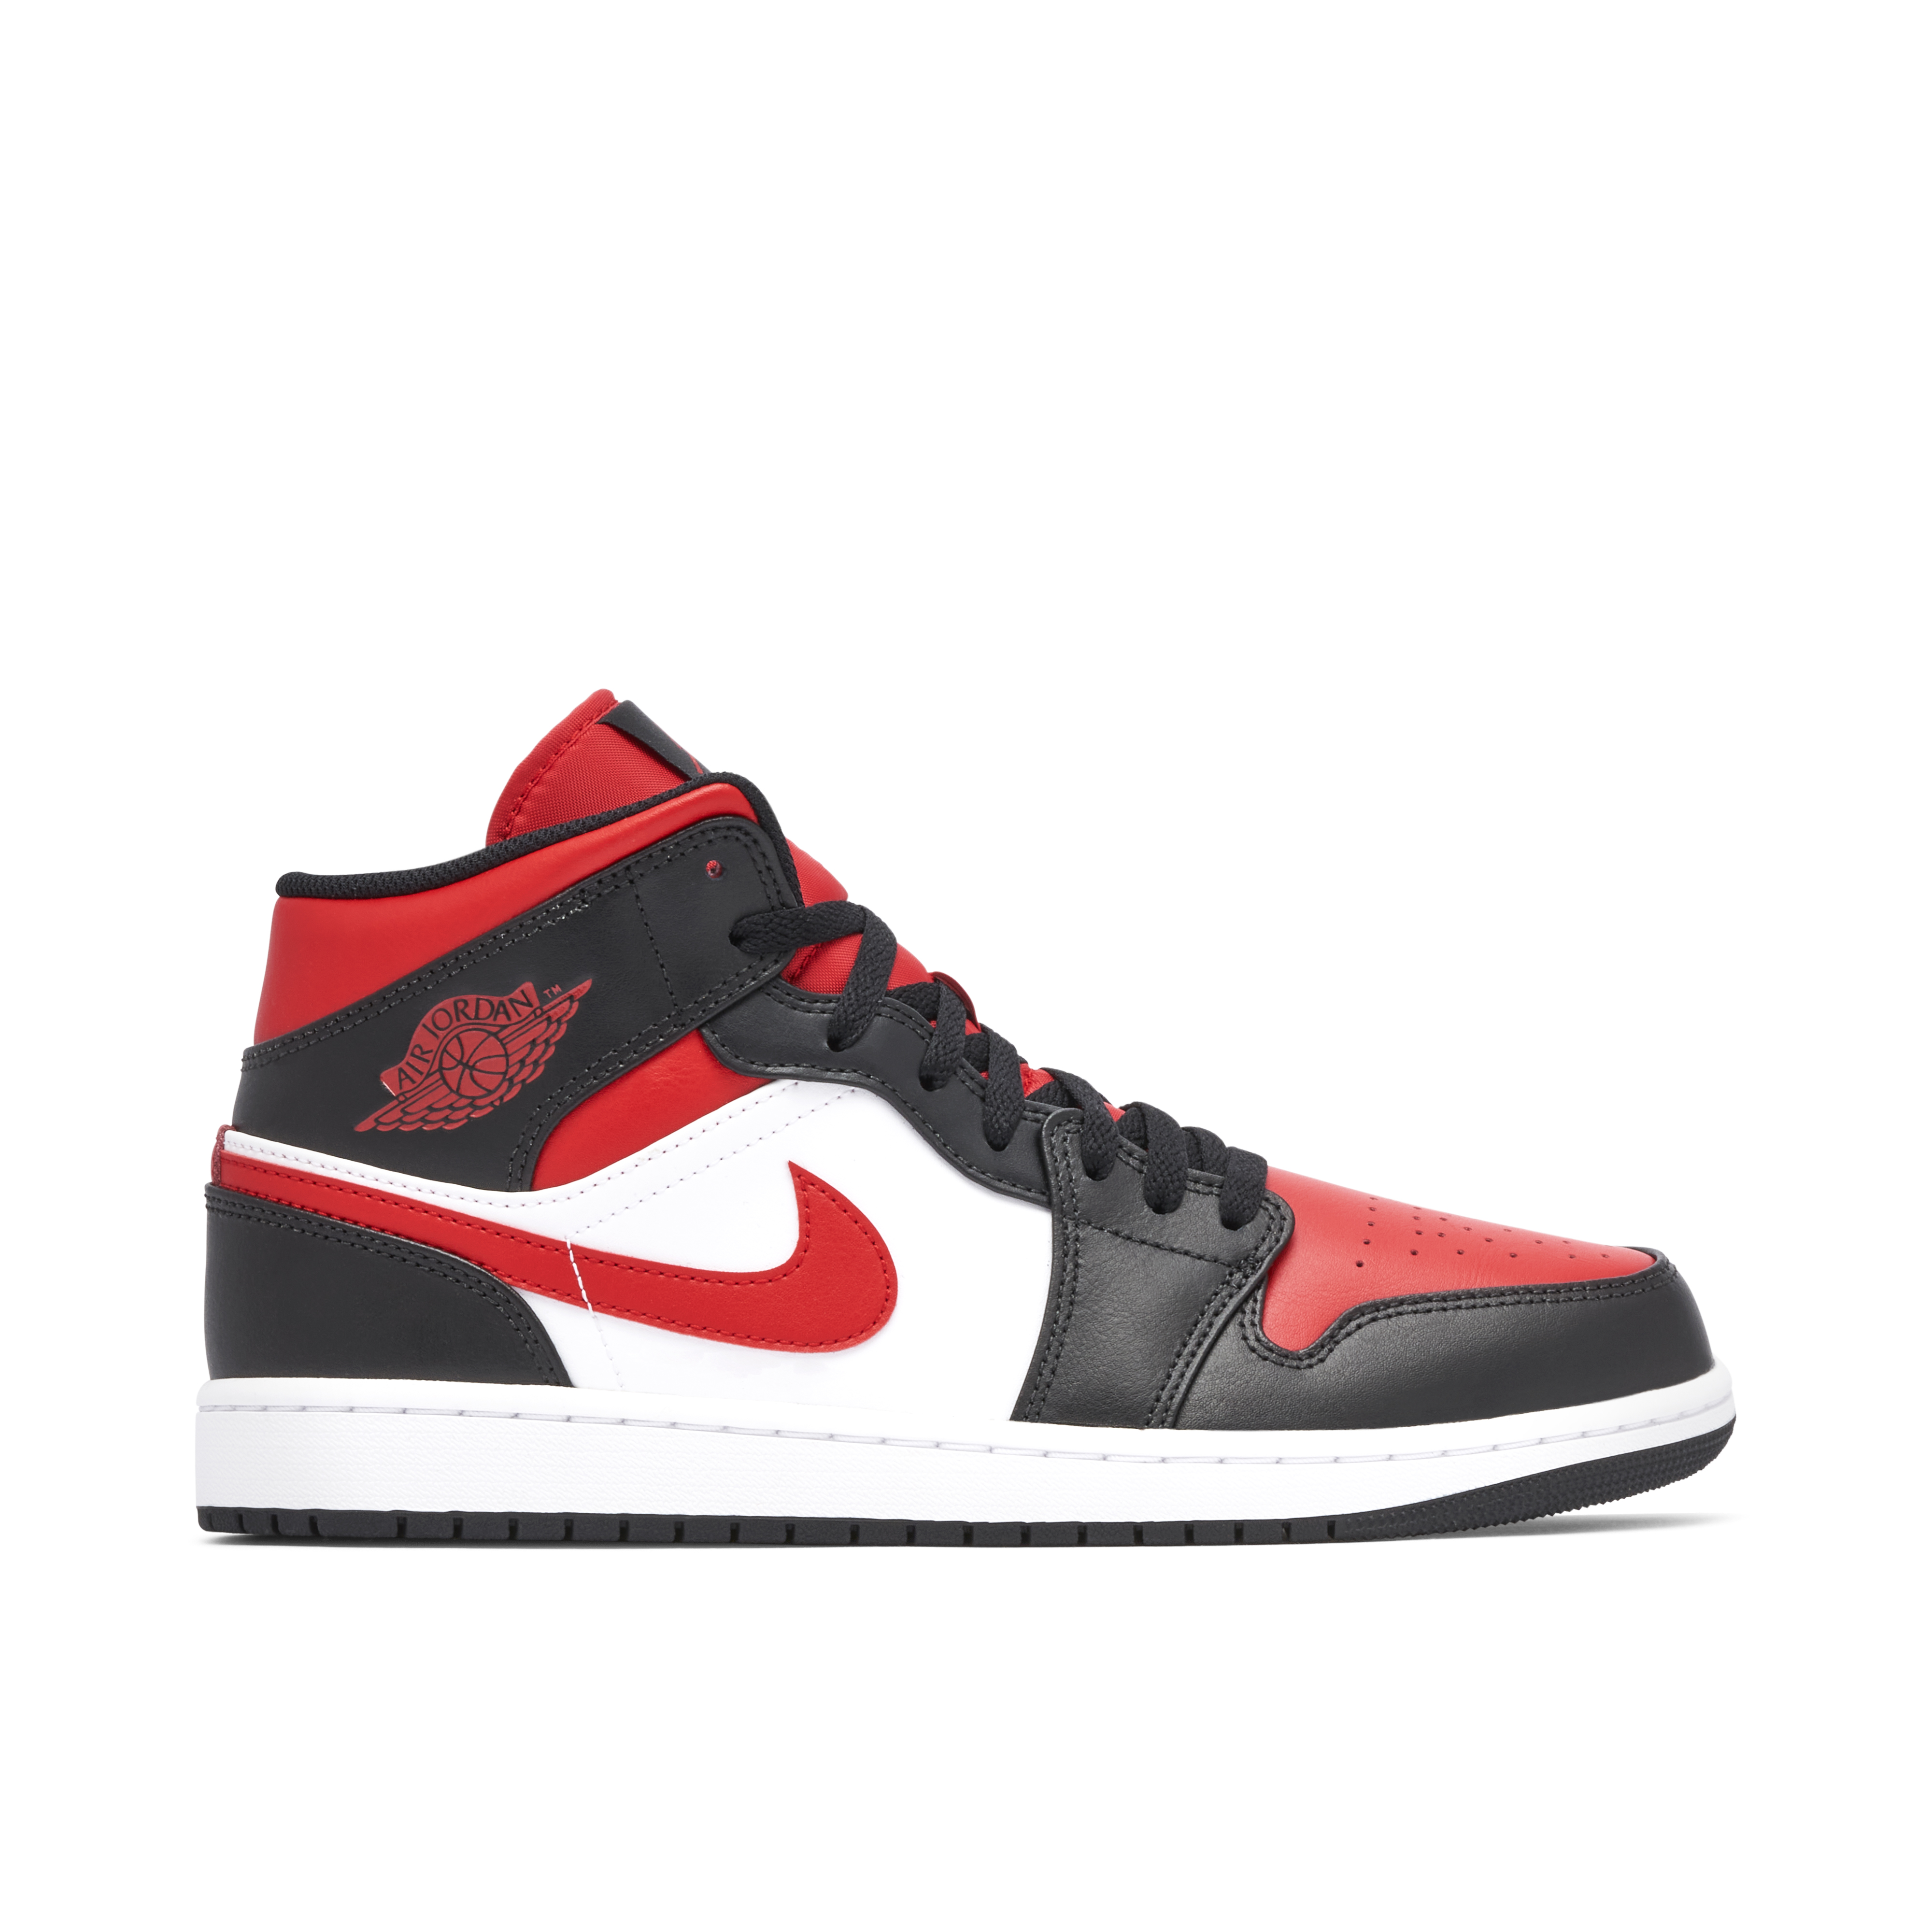 jordan shoes red and black